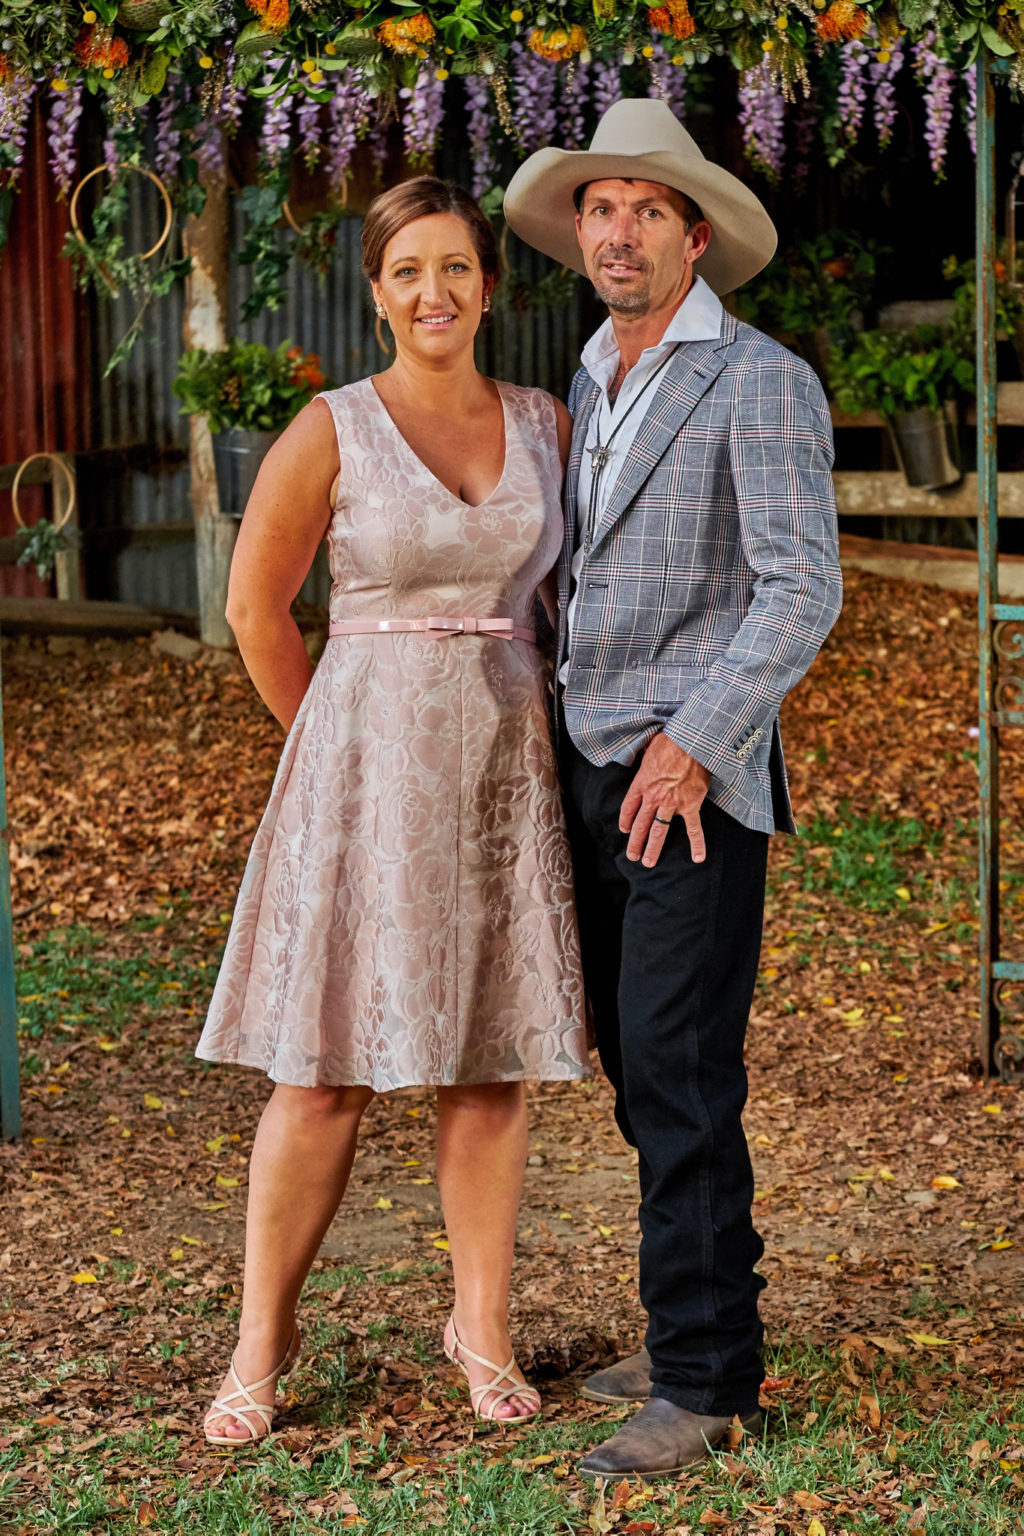 Married At First Sight Australia Couples- Where Are They Now?